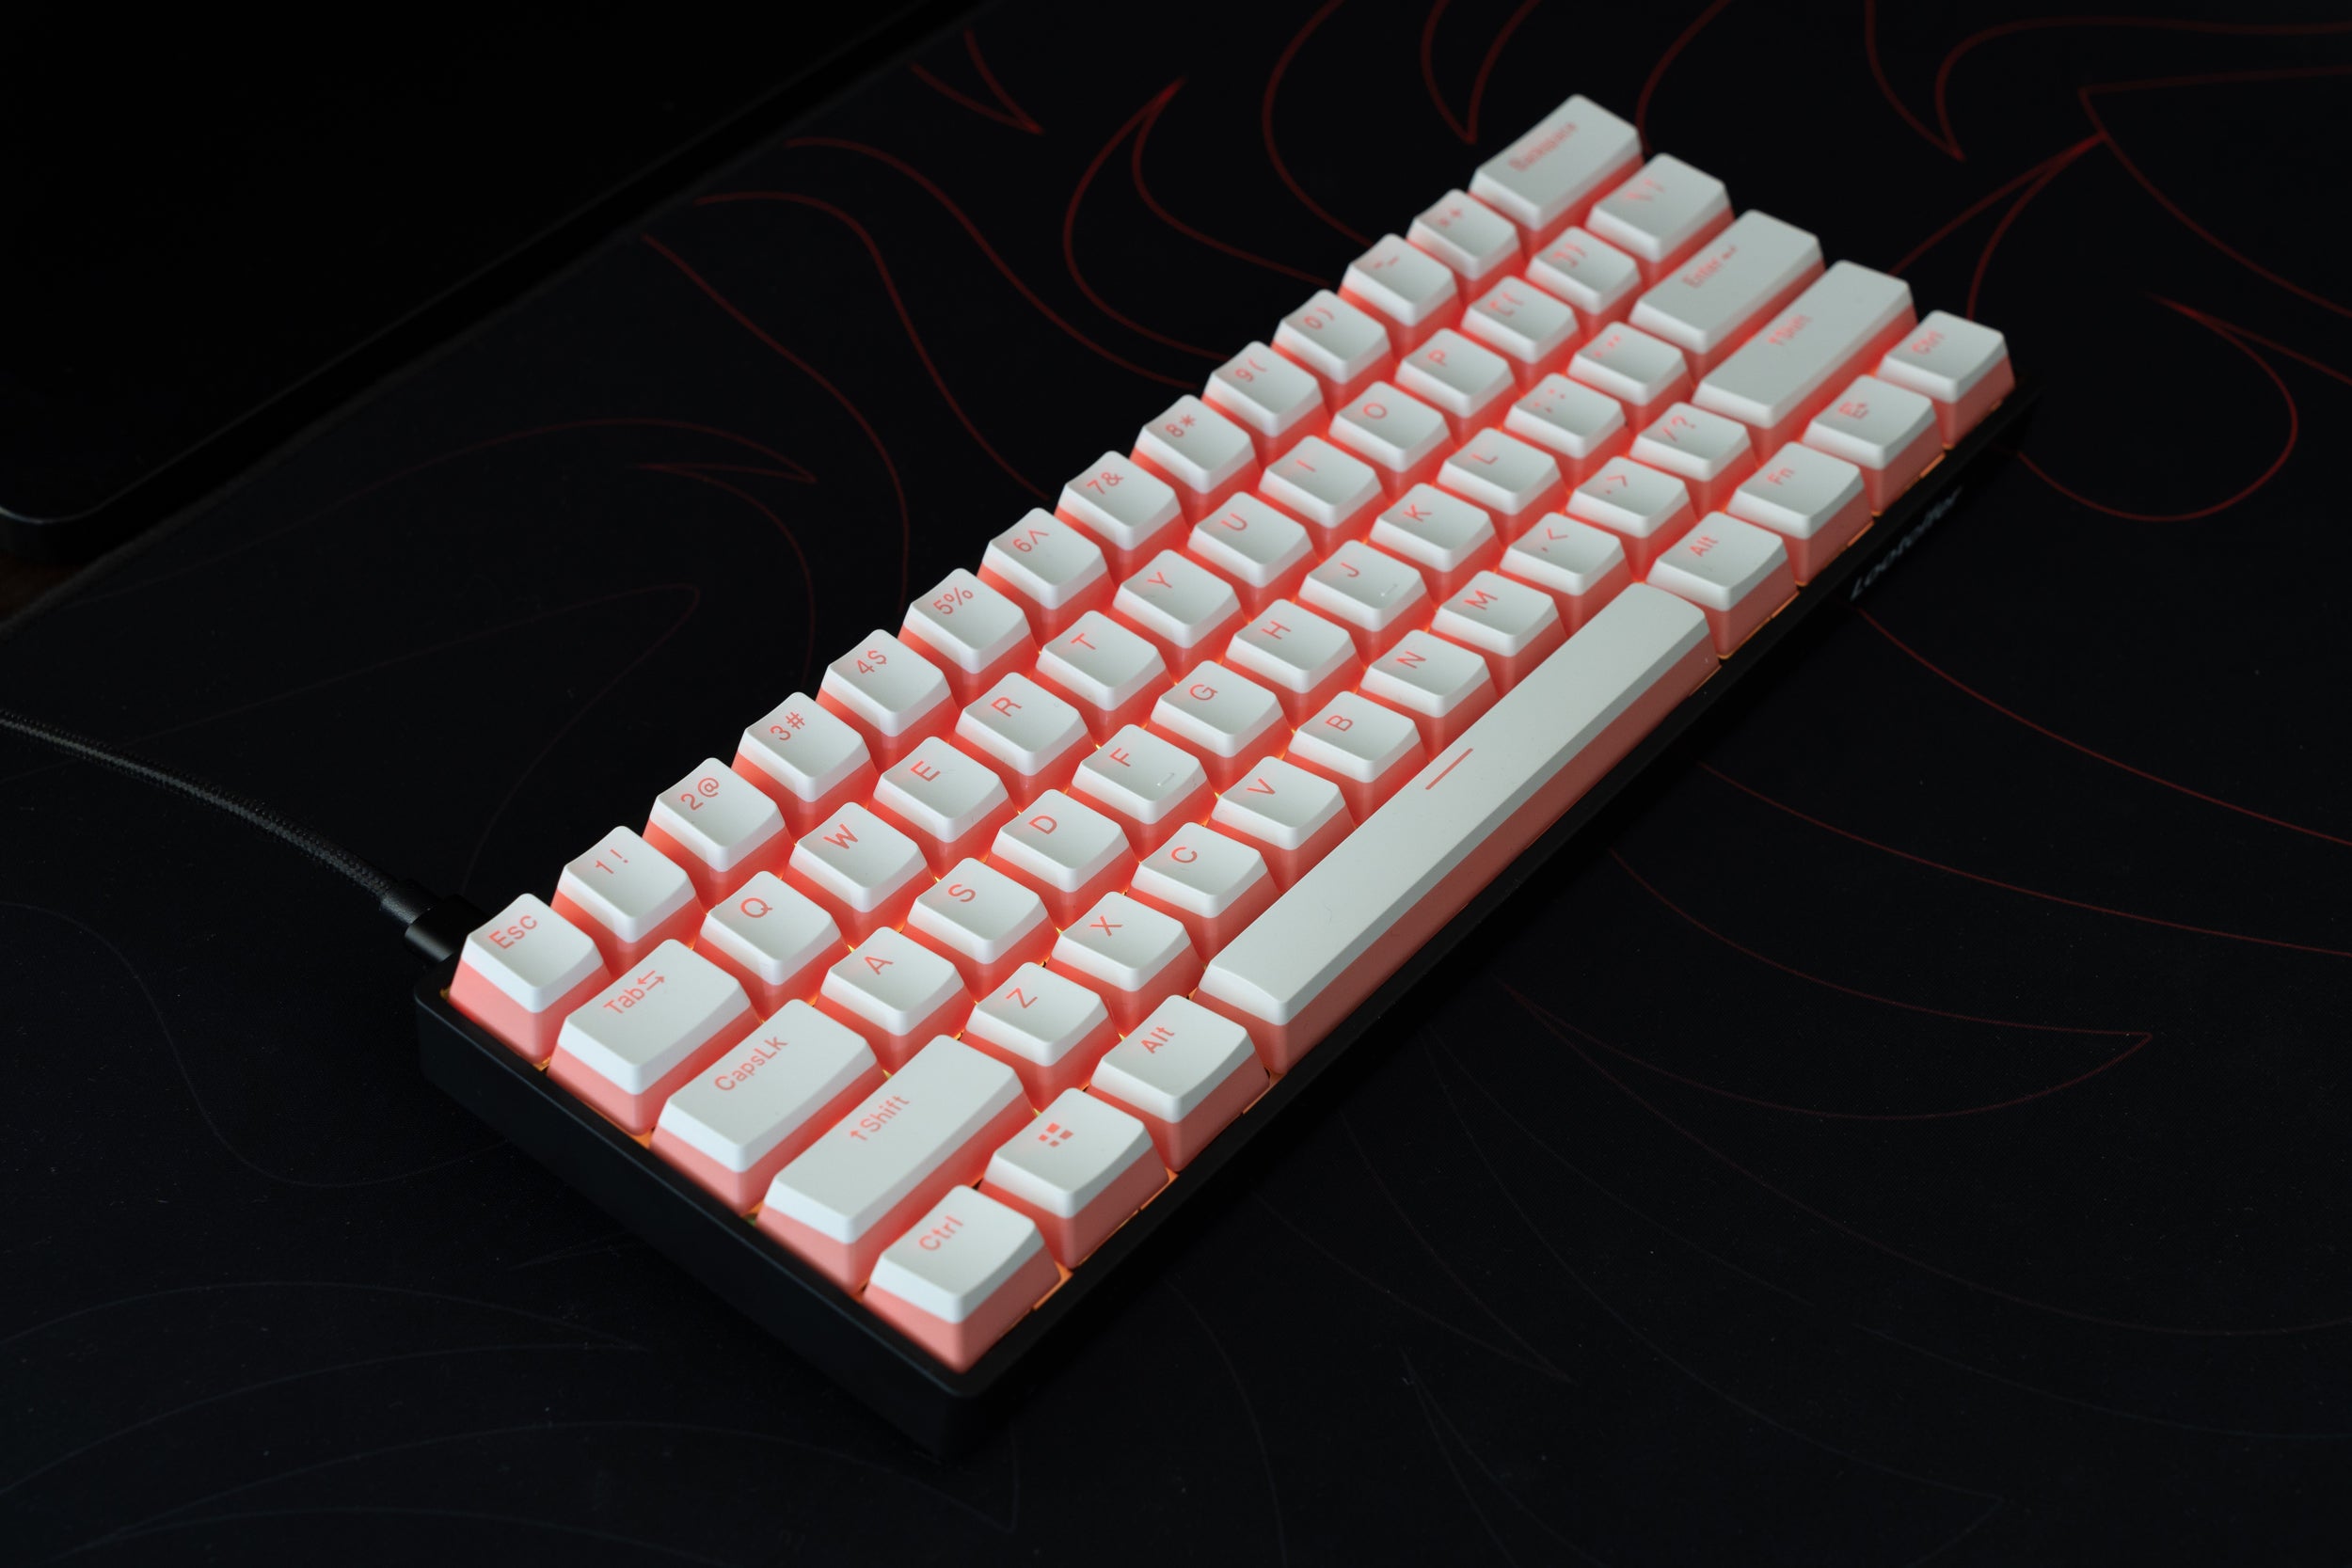 Peach Pudding Keycaps on Devil One